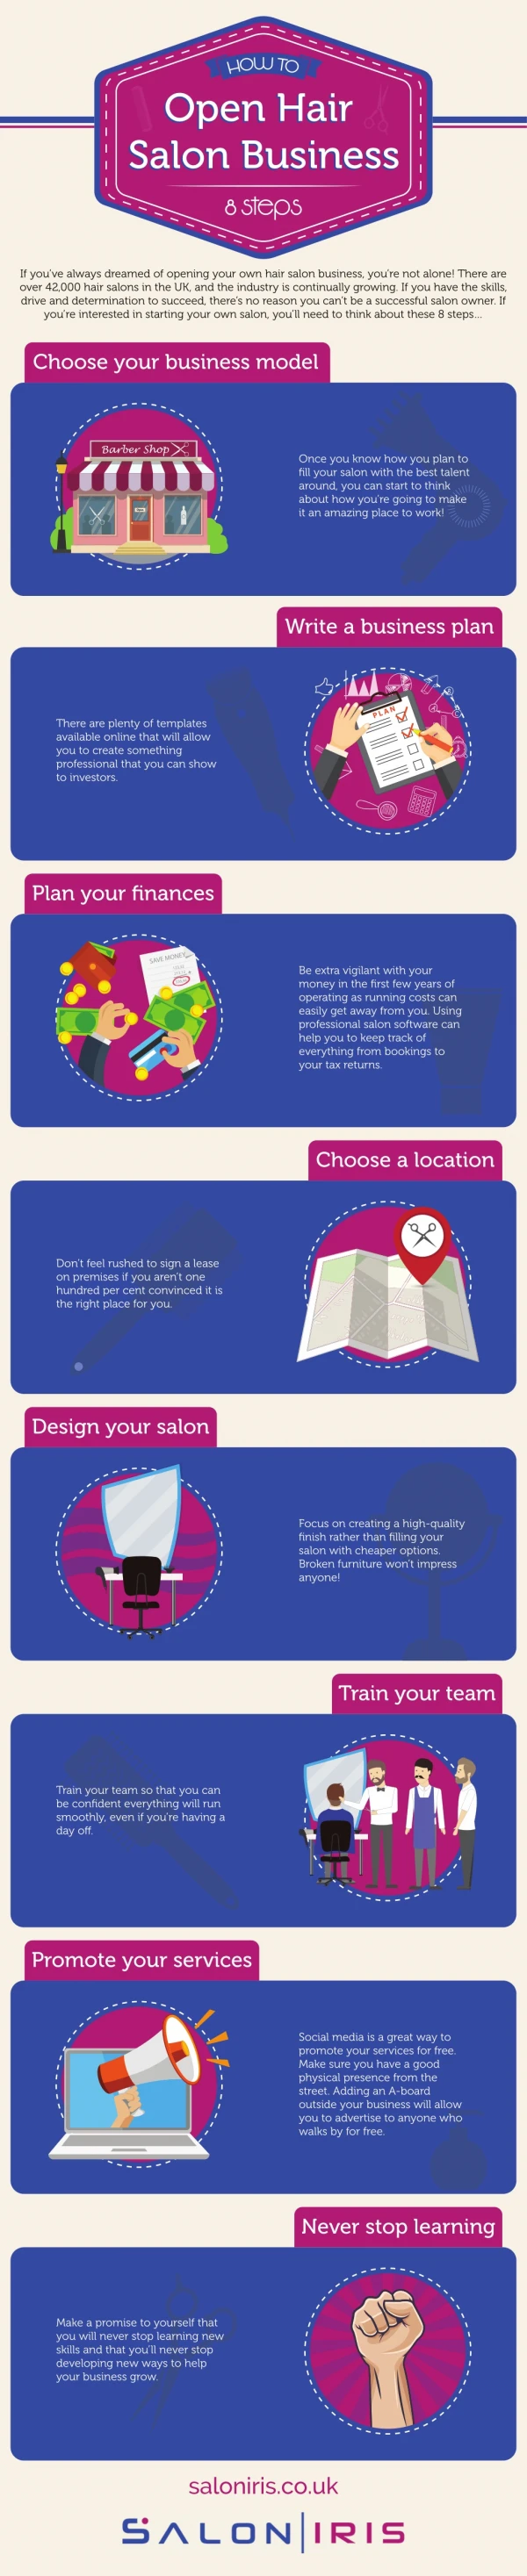 How To Open Hair Salon Business - 8 Steps